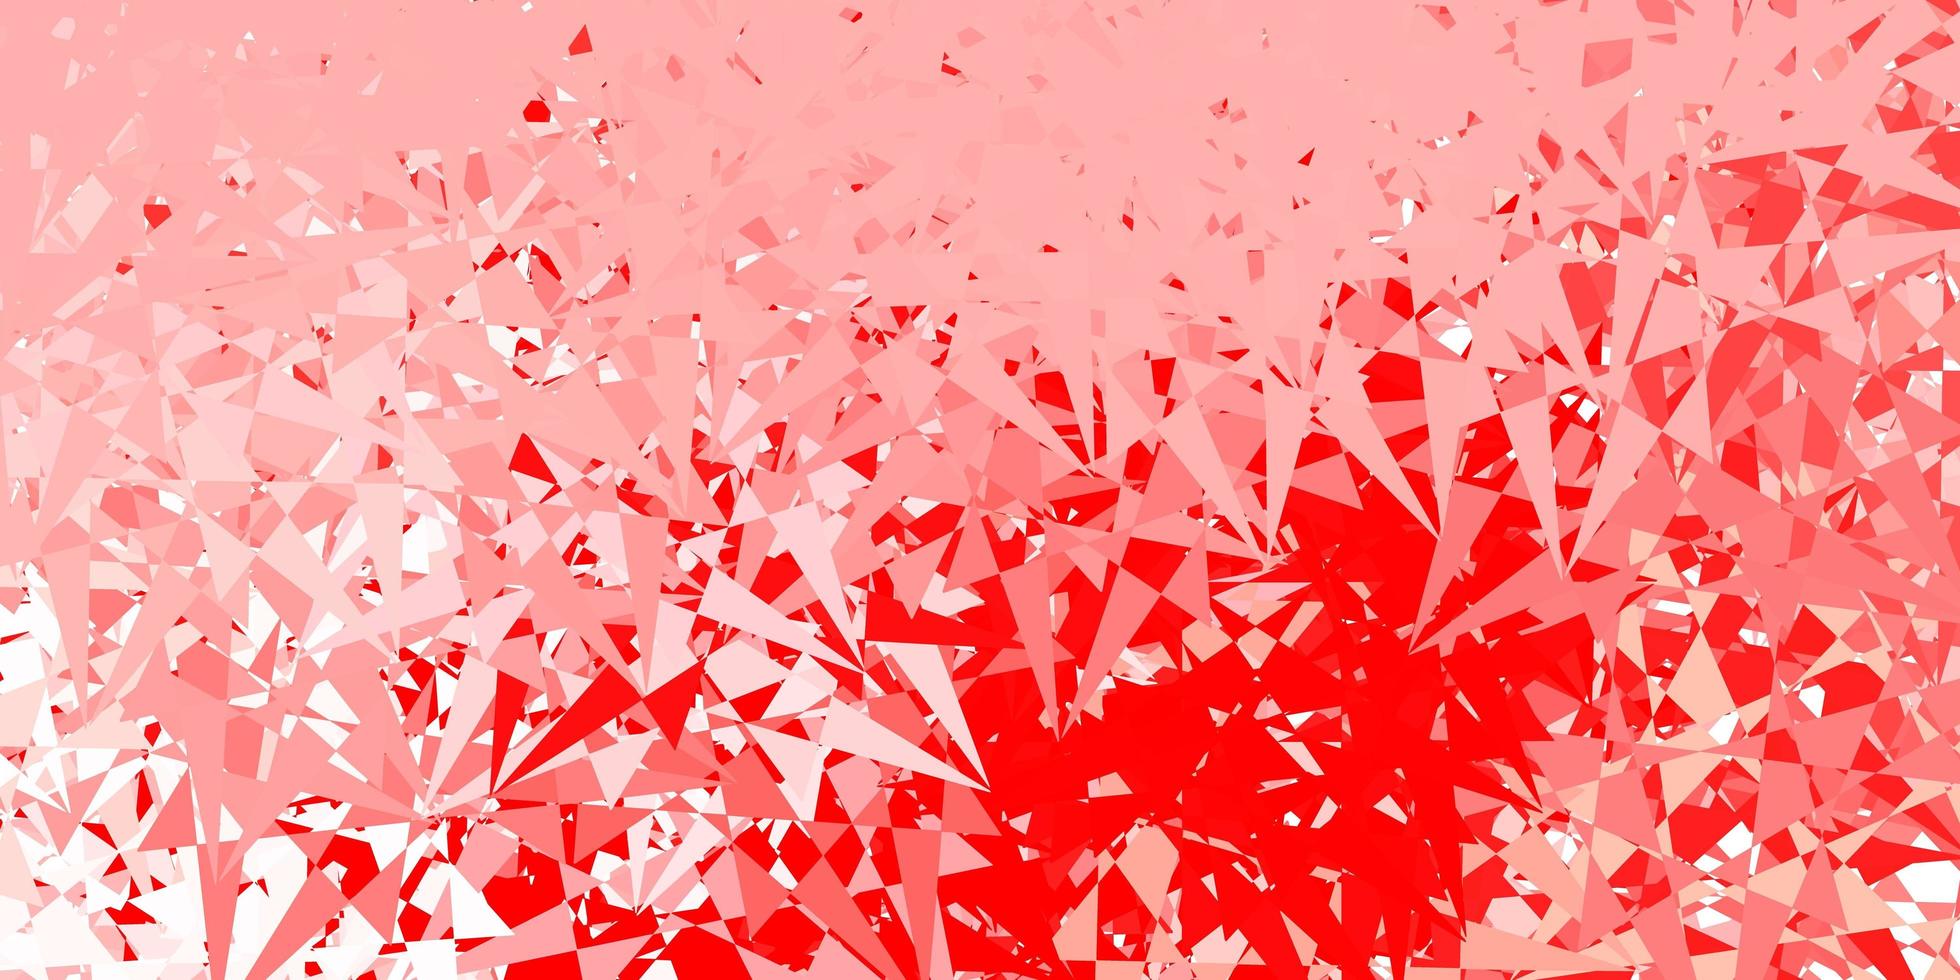 Light red vector background with polygonal forms